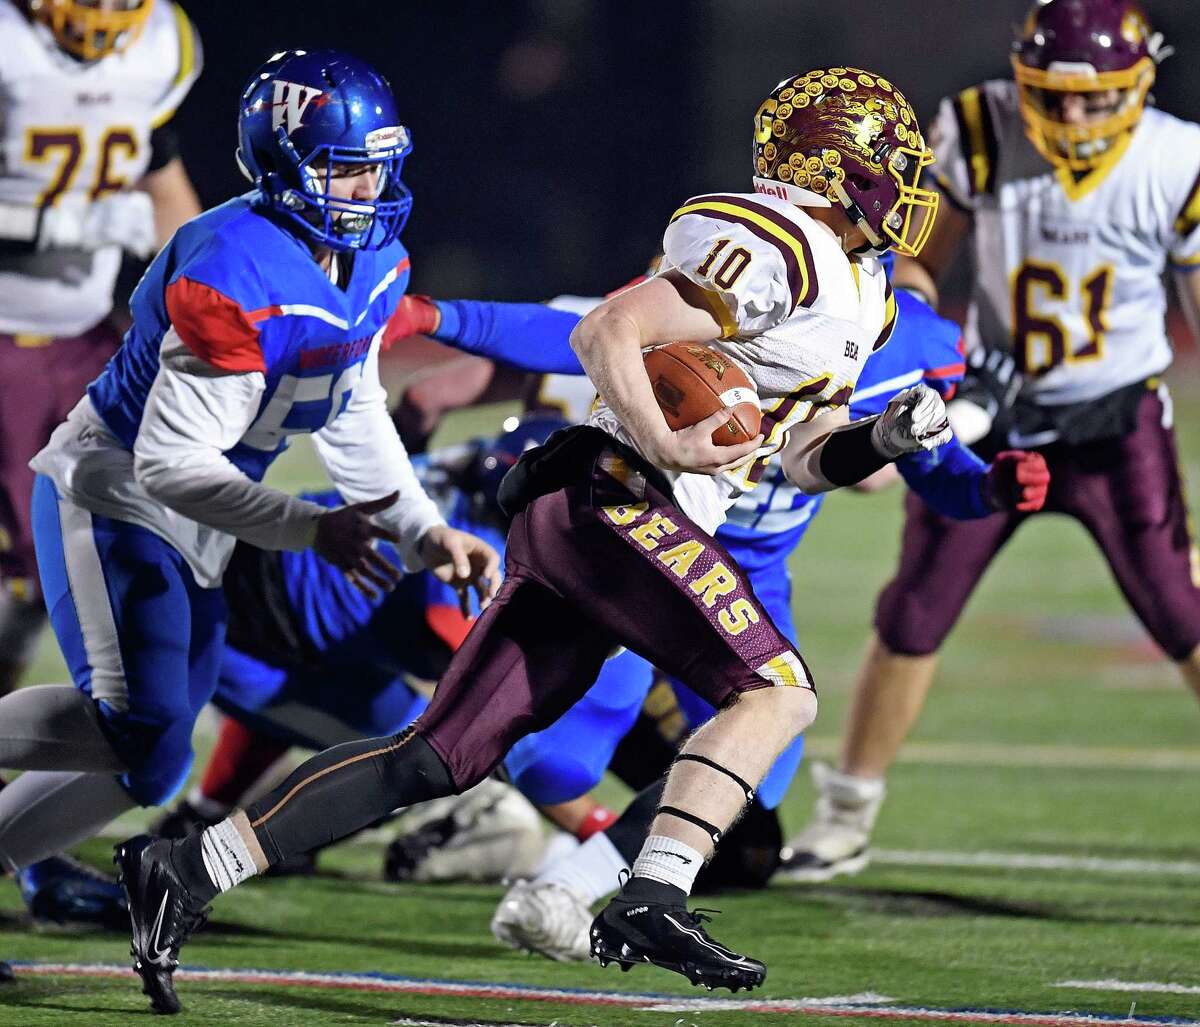 12/4/19 :: SPORTS :: DIMAURO :: Granby/Canton's Jackson Rome (10) races for yardage with Waterford's Thomas Pitasi (58) in pursuit in CIAC Class M football quarterfinal action Wednesday, December 4, 2019.